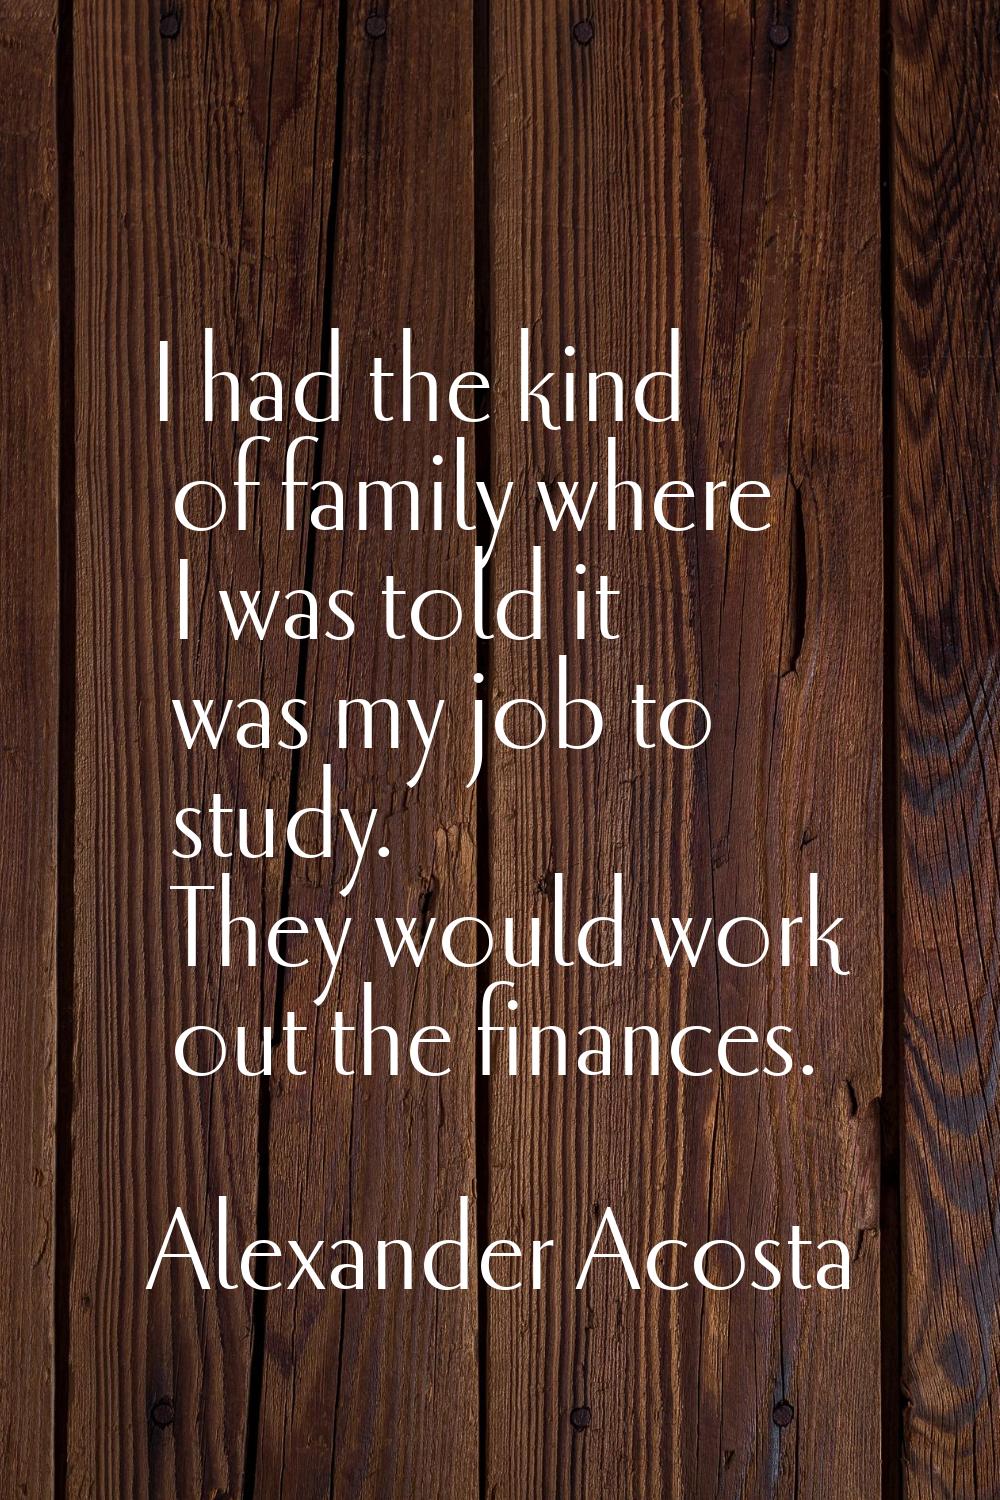 I had the kind of family where I was told it was my job to study. They would work out the finances.